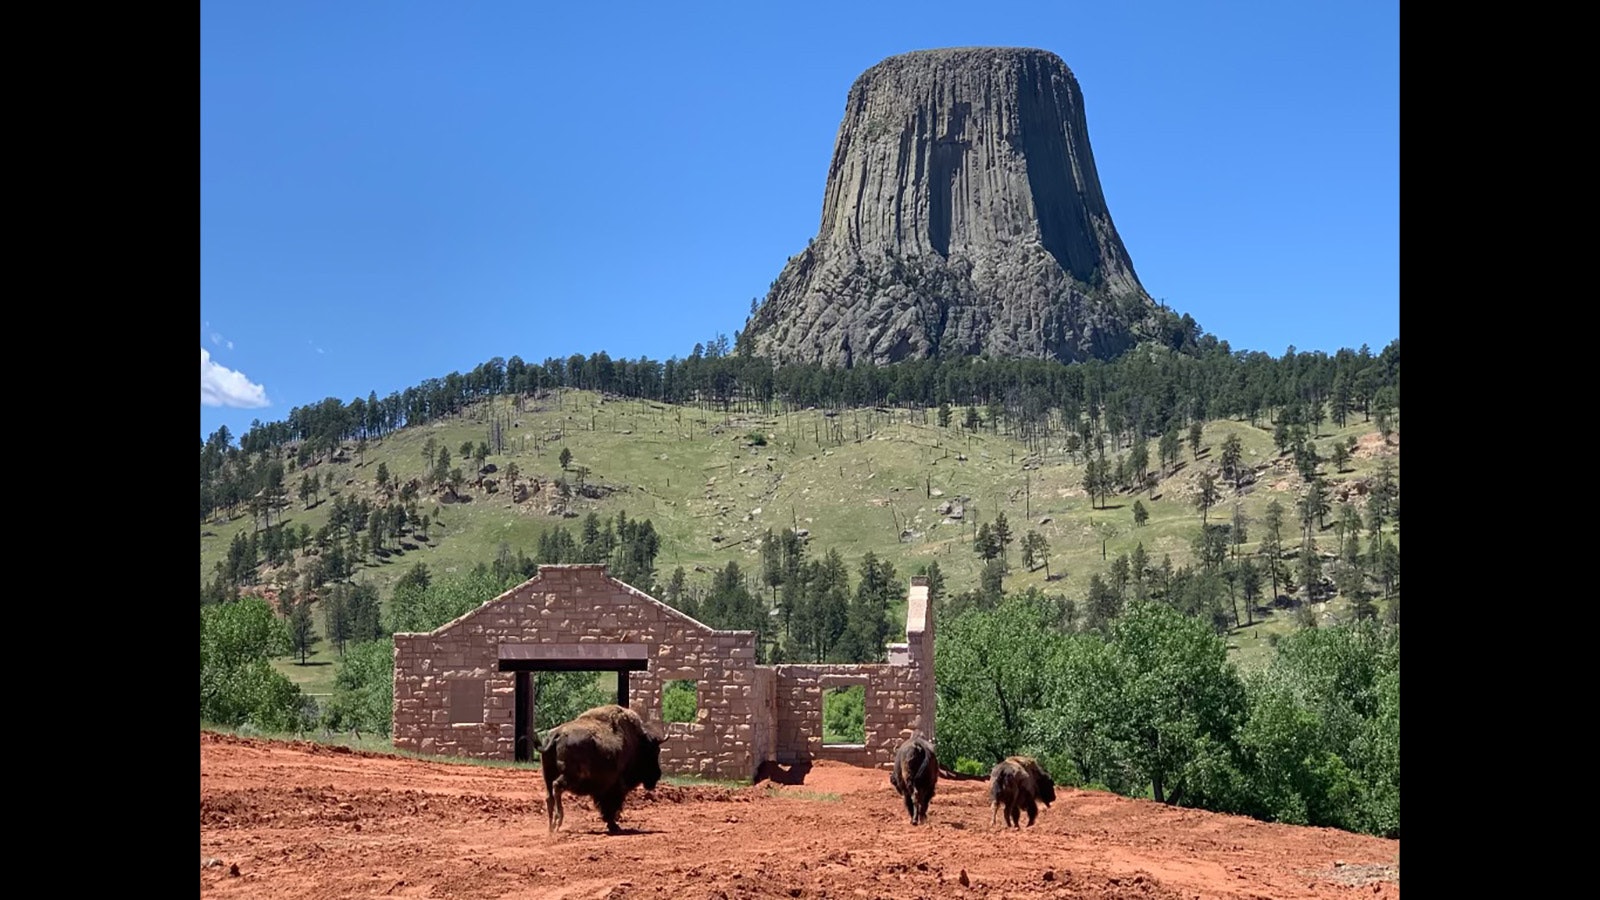 A few bison hang out at the old Toomey's Mill rebuilt on a ranch near Devils Tower.